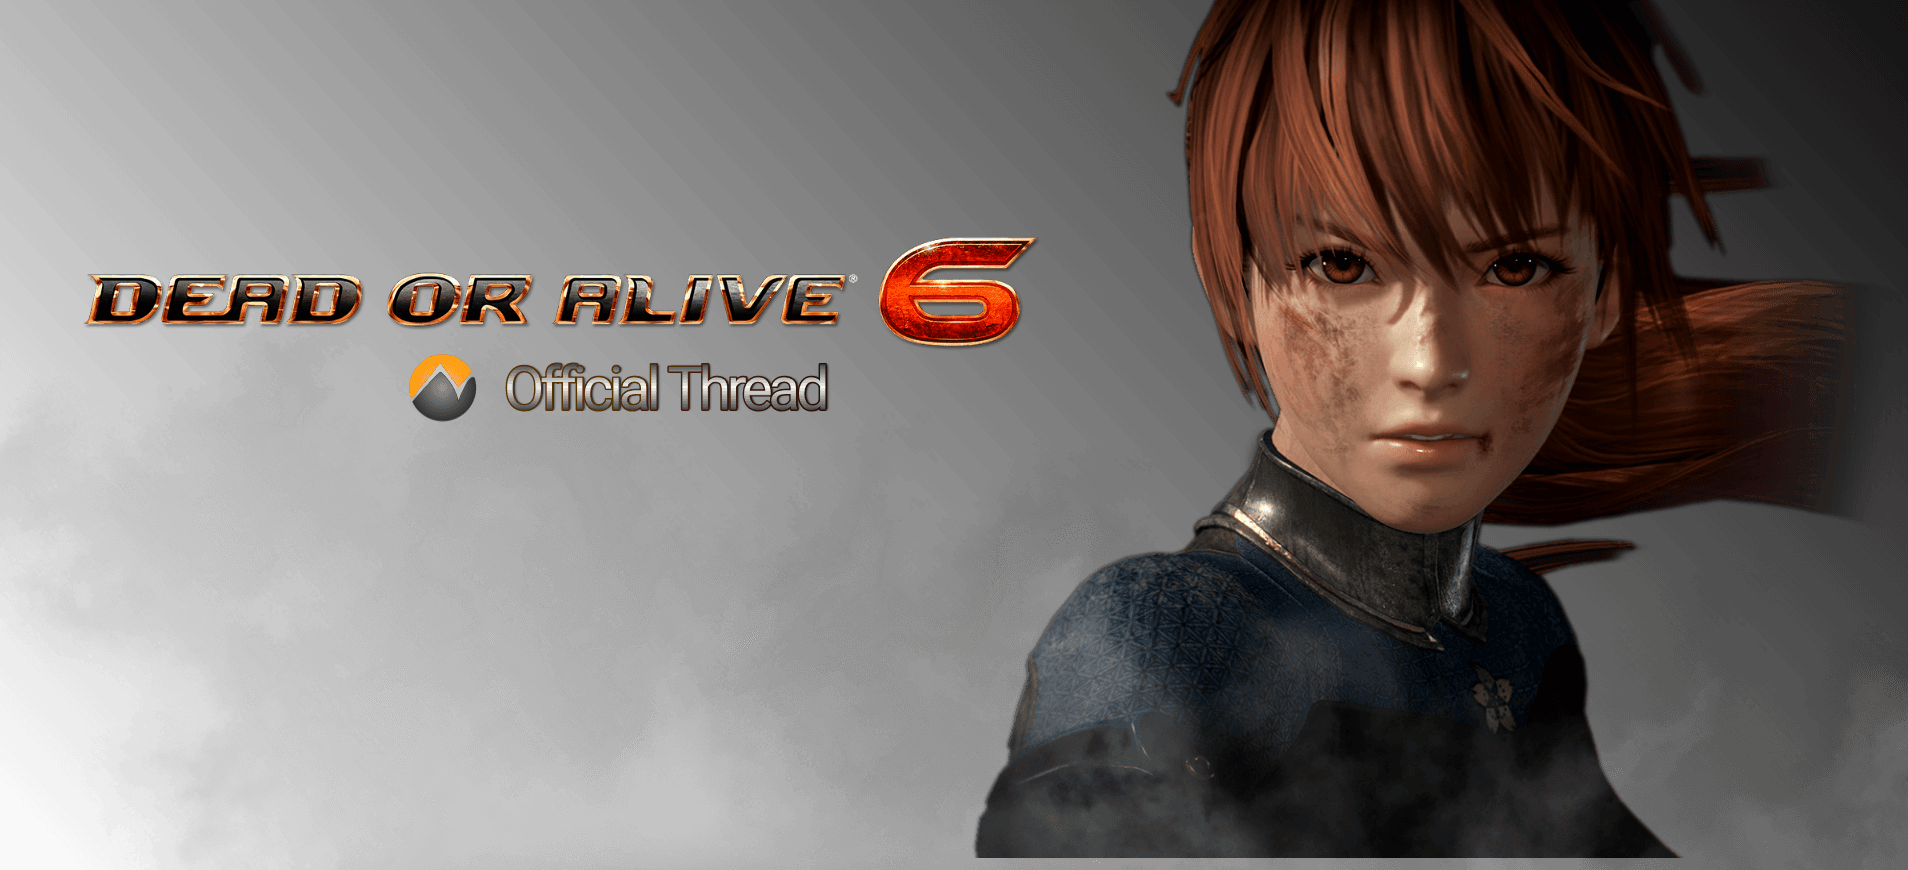 Dead or Alive 6 PS4 Version Full Game Free Download - GF